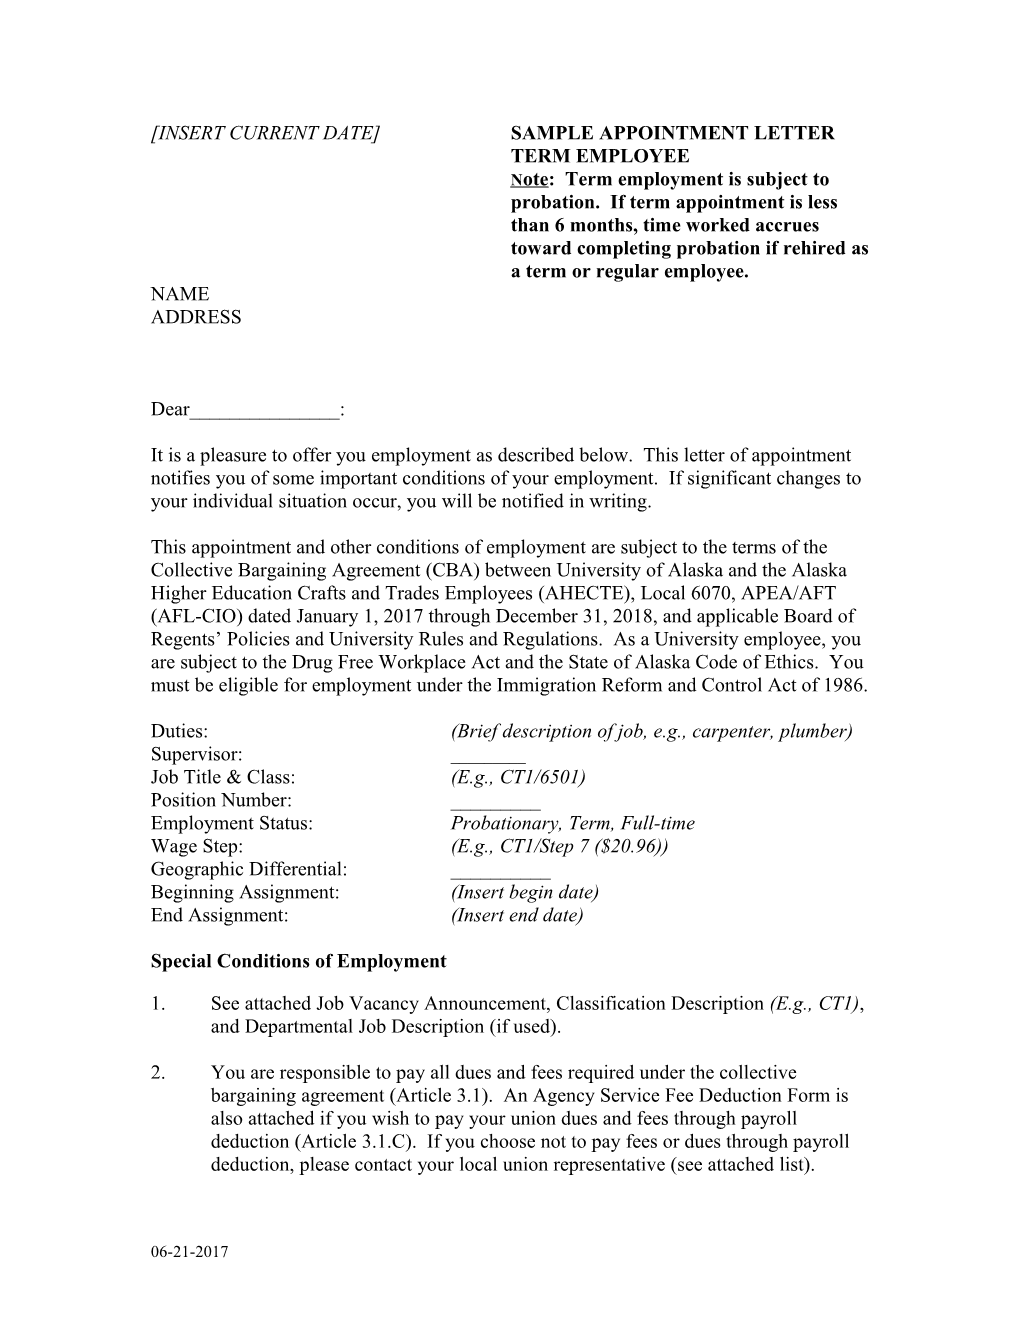 August 1, 1998 SAMPLE APPOINTMENT LETTER TERM EMPLOYEE